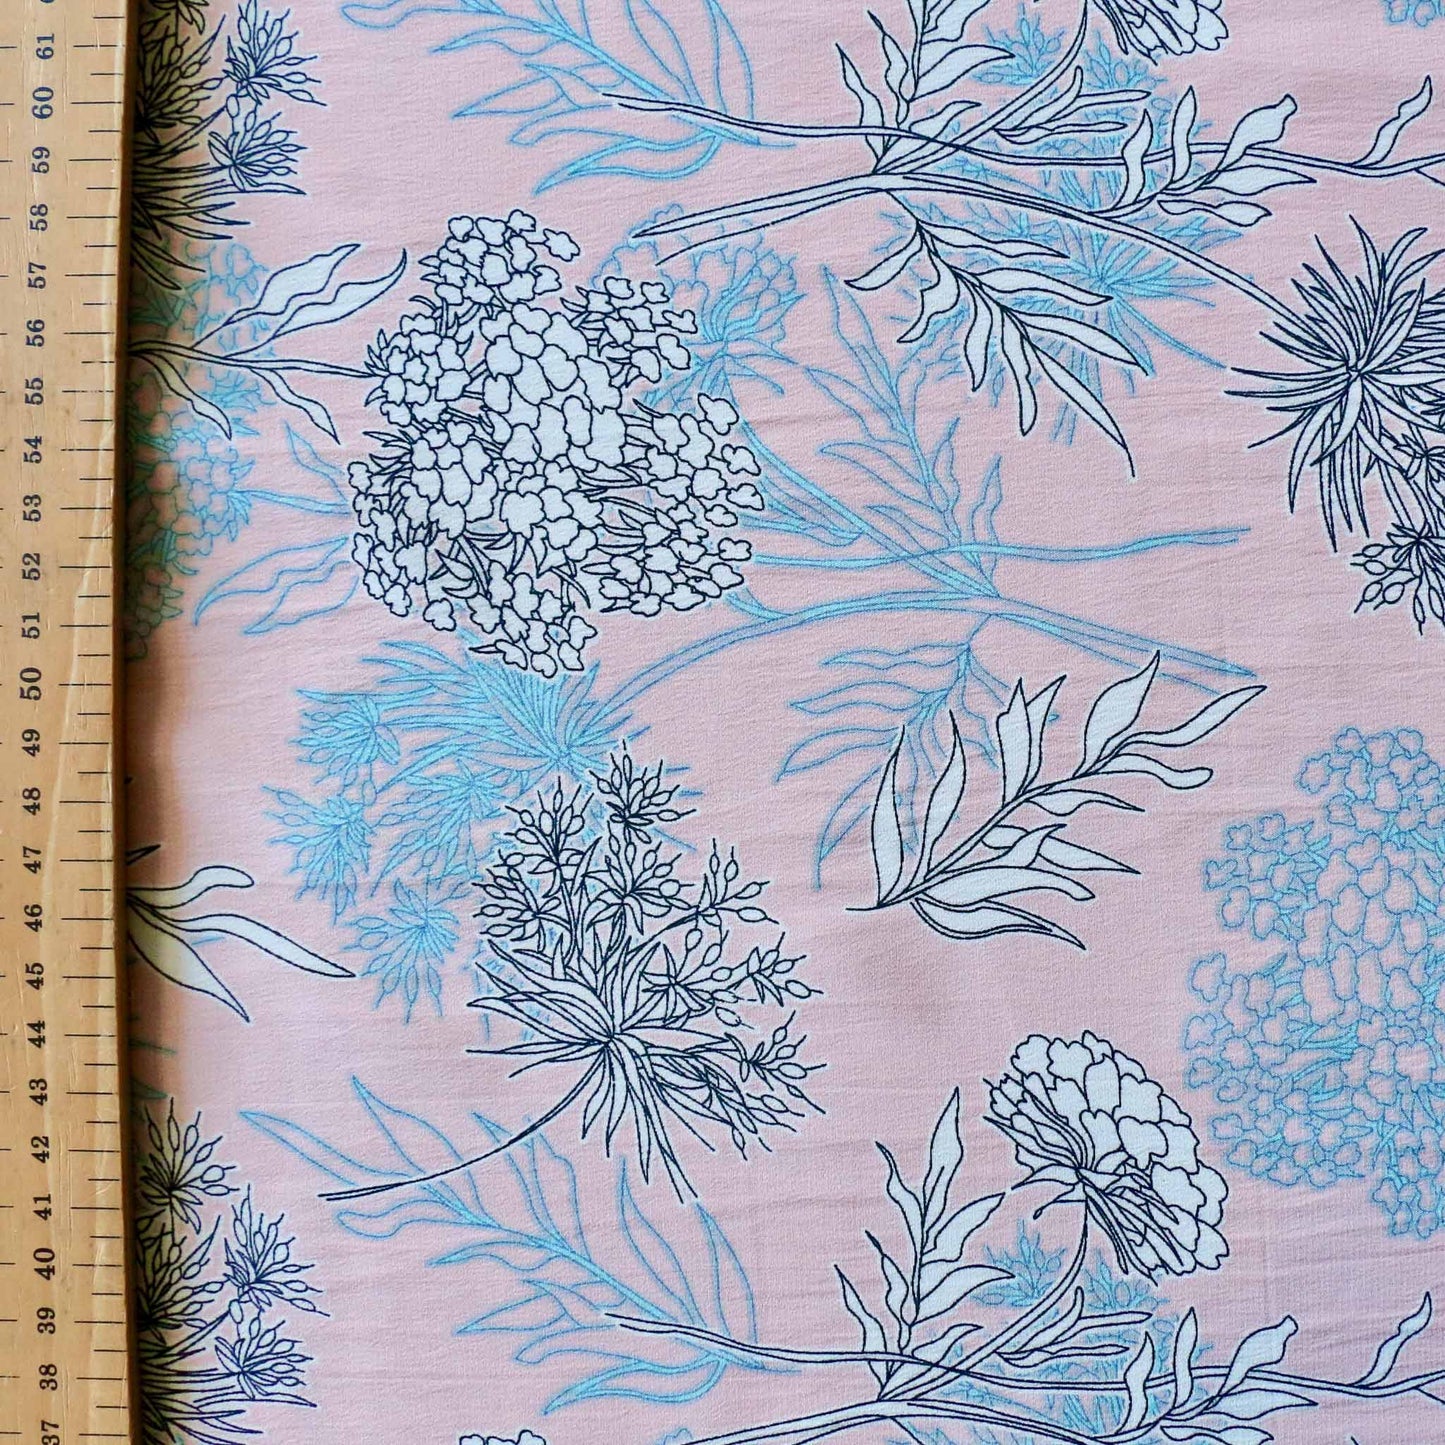 metre stretchy pink chiffon synthetic polyester fabric with white floral design